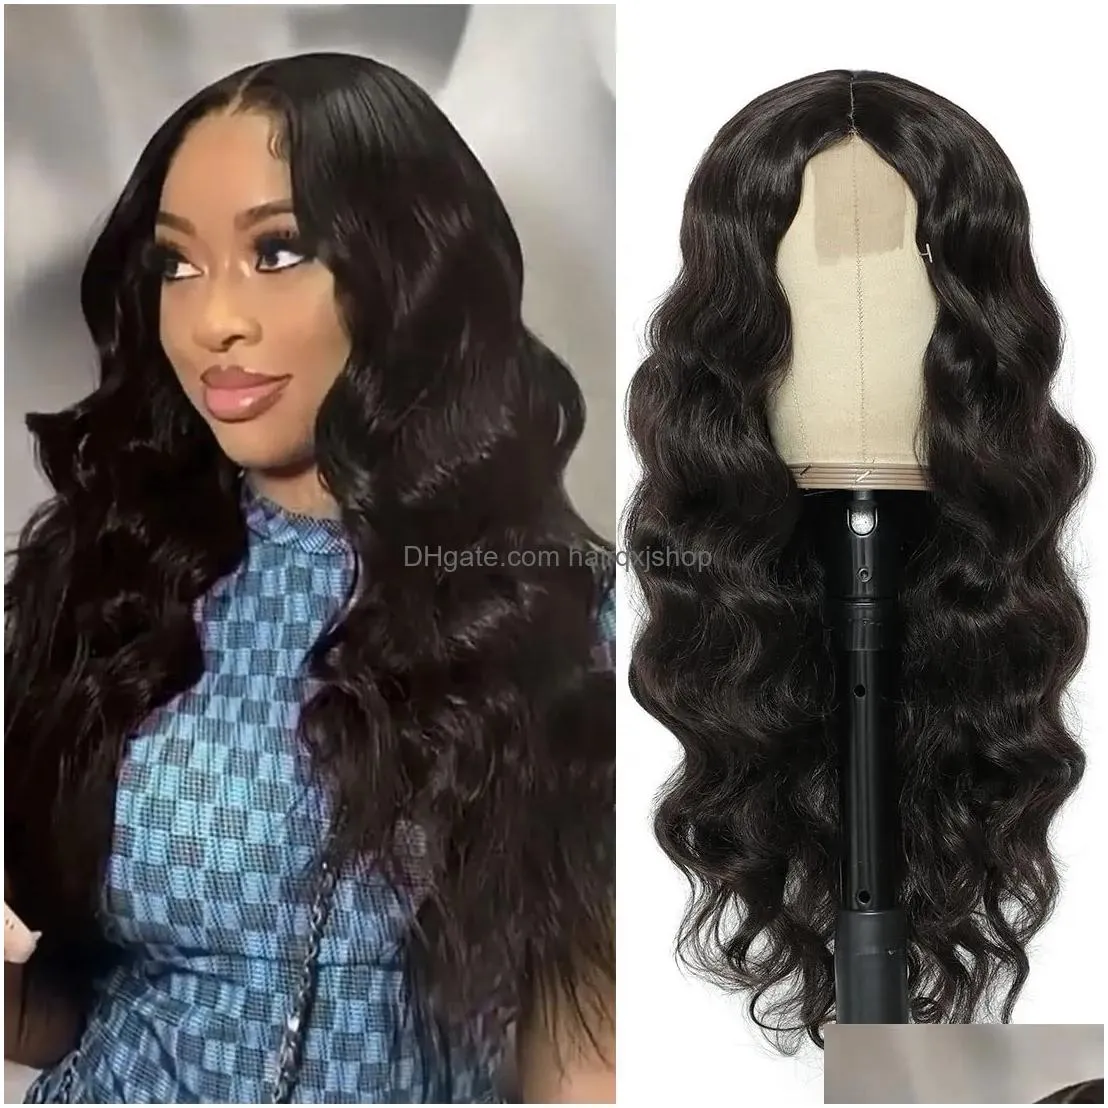 Lace Wigs Long Deep Wave Fl Lace Front Wigs Human Hair Curly 6 Styles Female Synthetic Natural Fast Drop Delivery Hair Products Hair W Dhctv